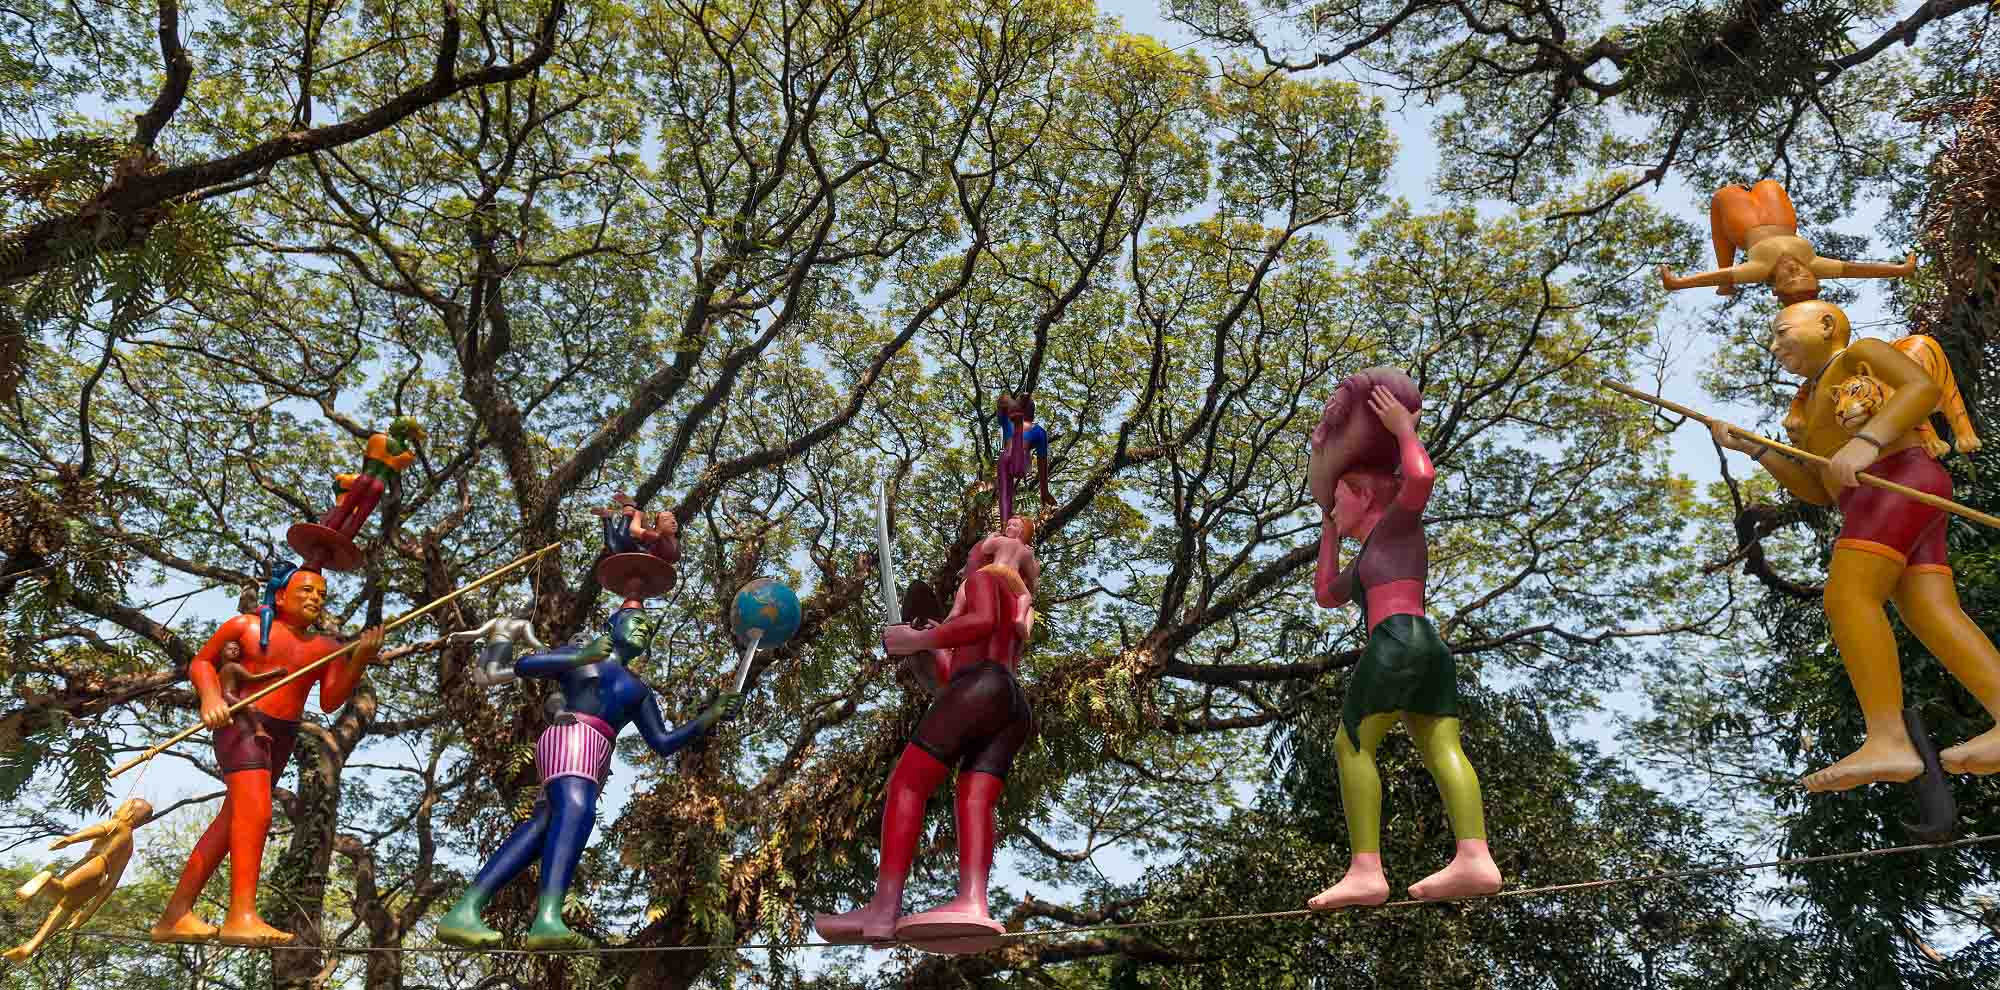 Brightly painted human-like sculptures balance various objects on their heads and walk across a tightrope with trees in the background.